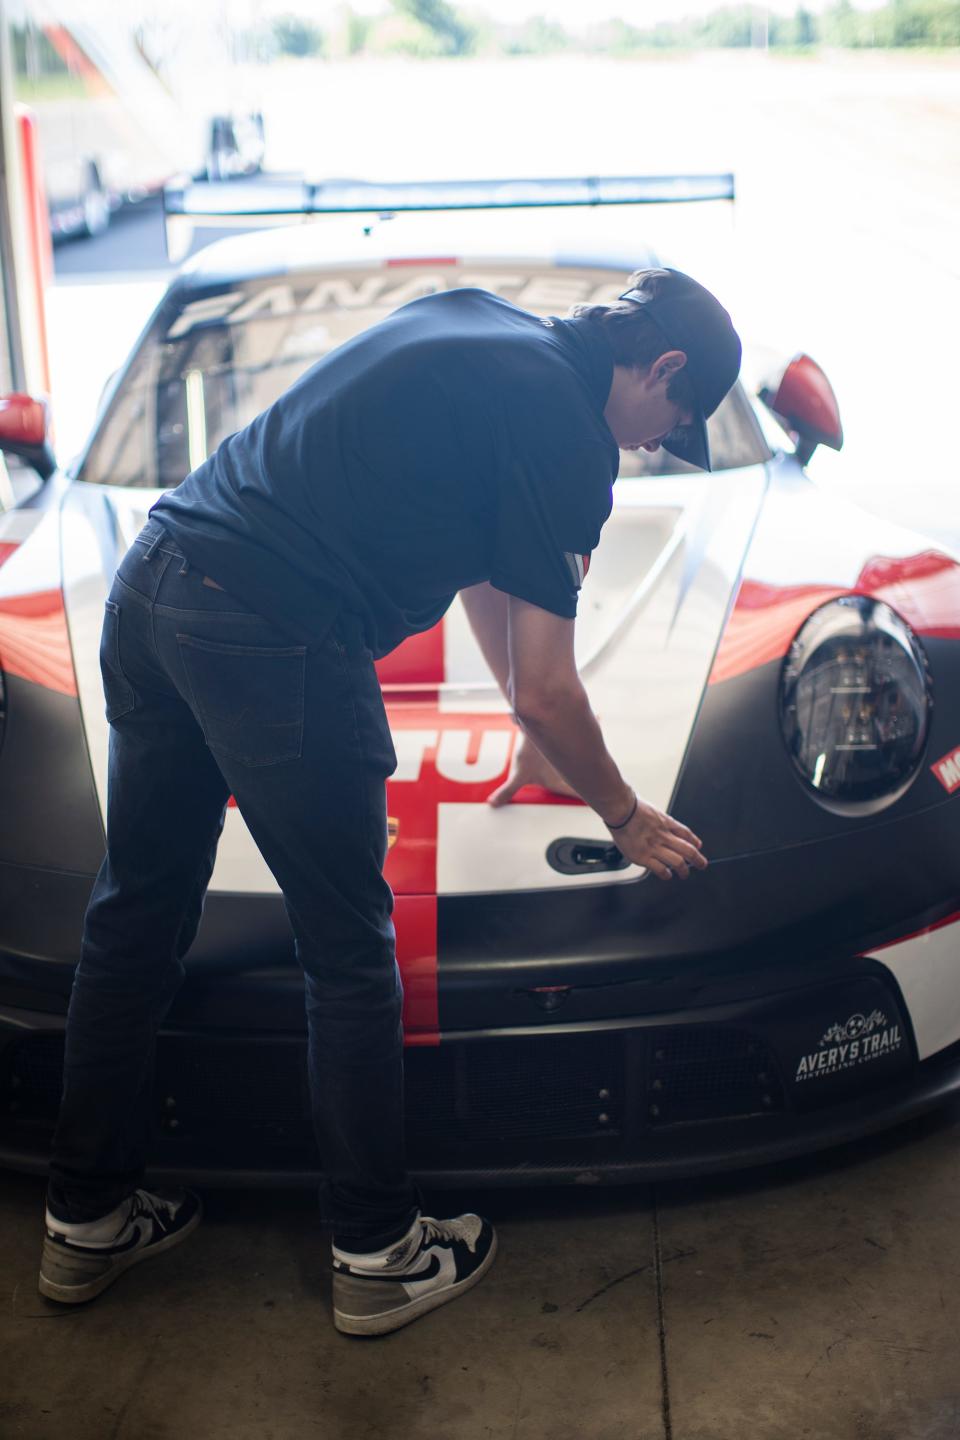 Despite being 17 years old, Seth Lucas already is a strong race car driver because of his maturity. "He deals with things as a 30-year-old might," said Chris Lucas, who is his son’s manager.